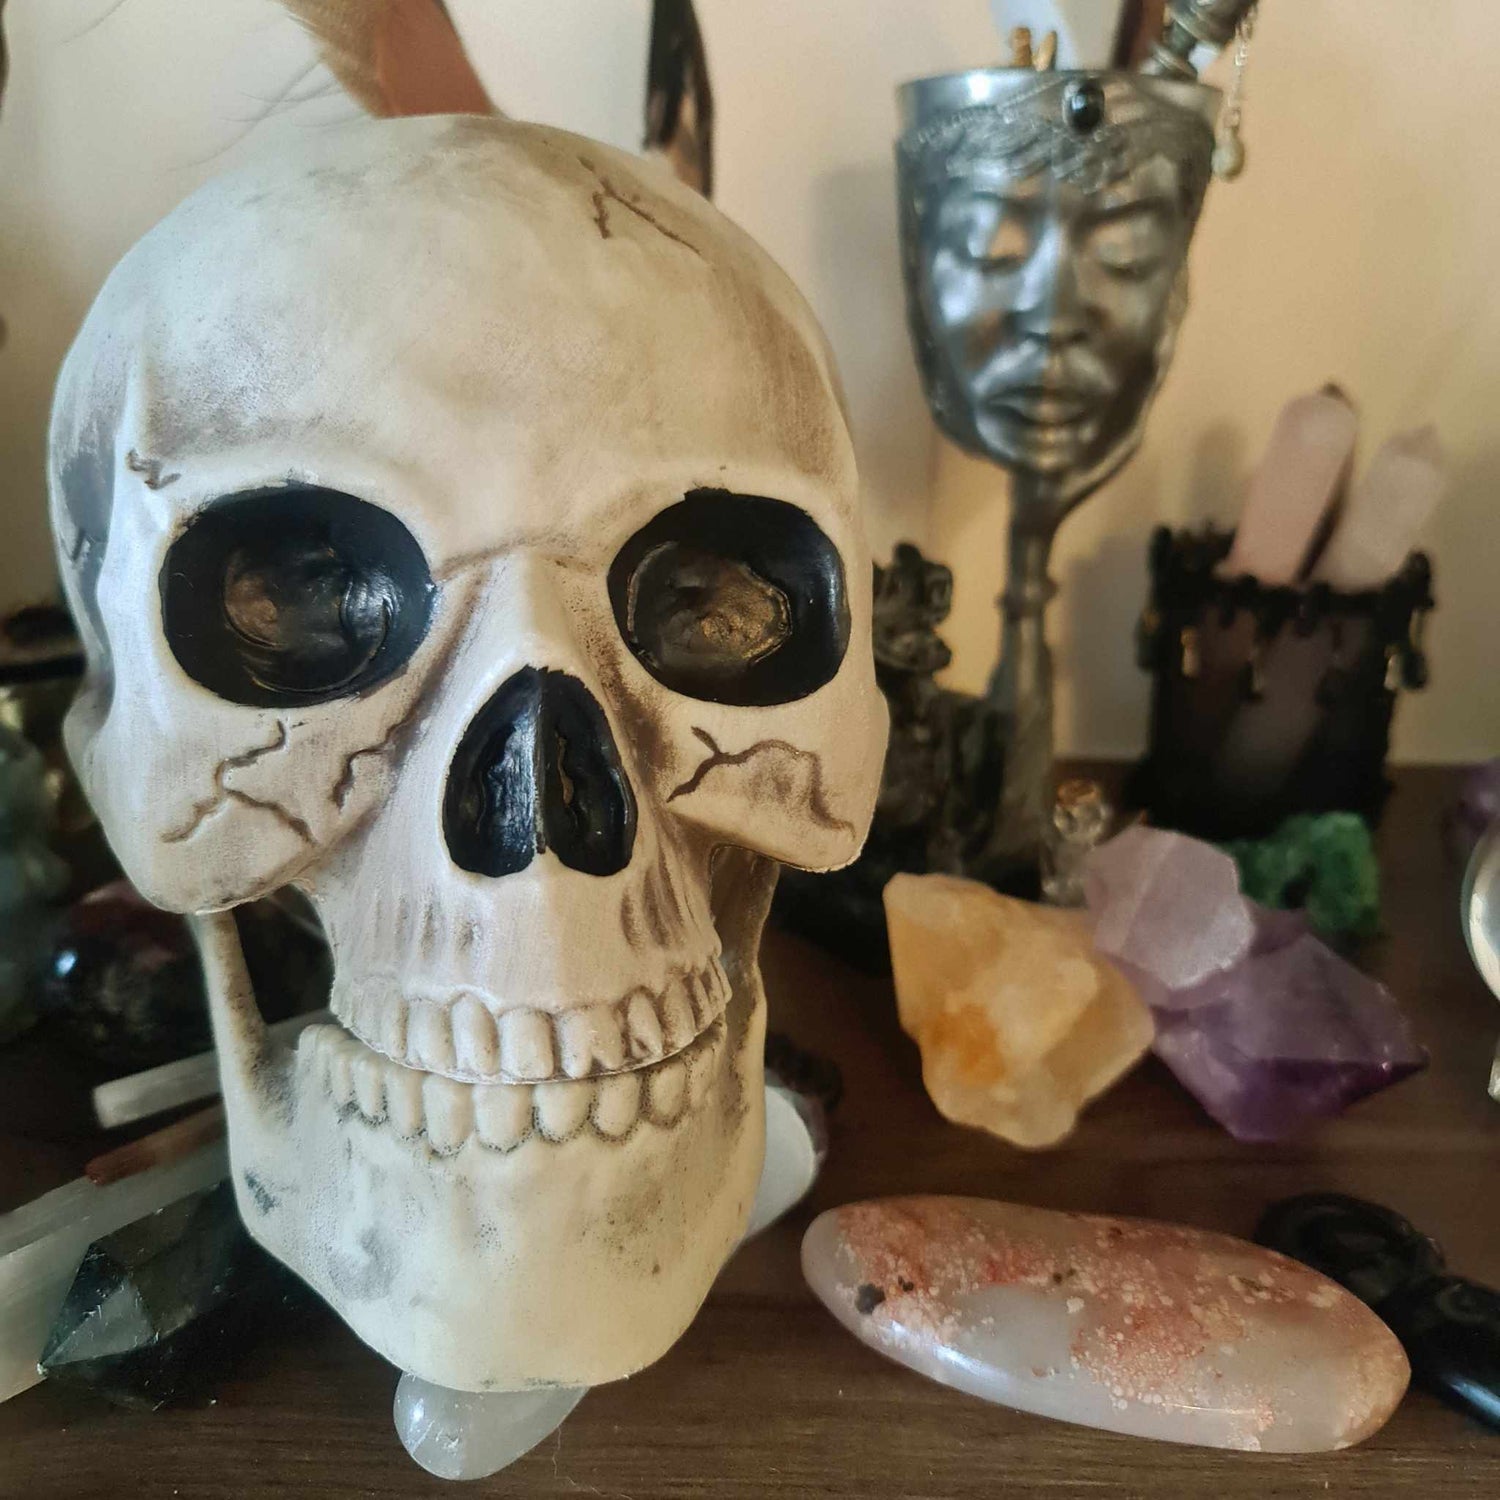 How to use a Crystal Skull?